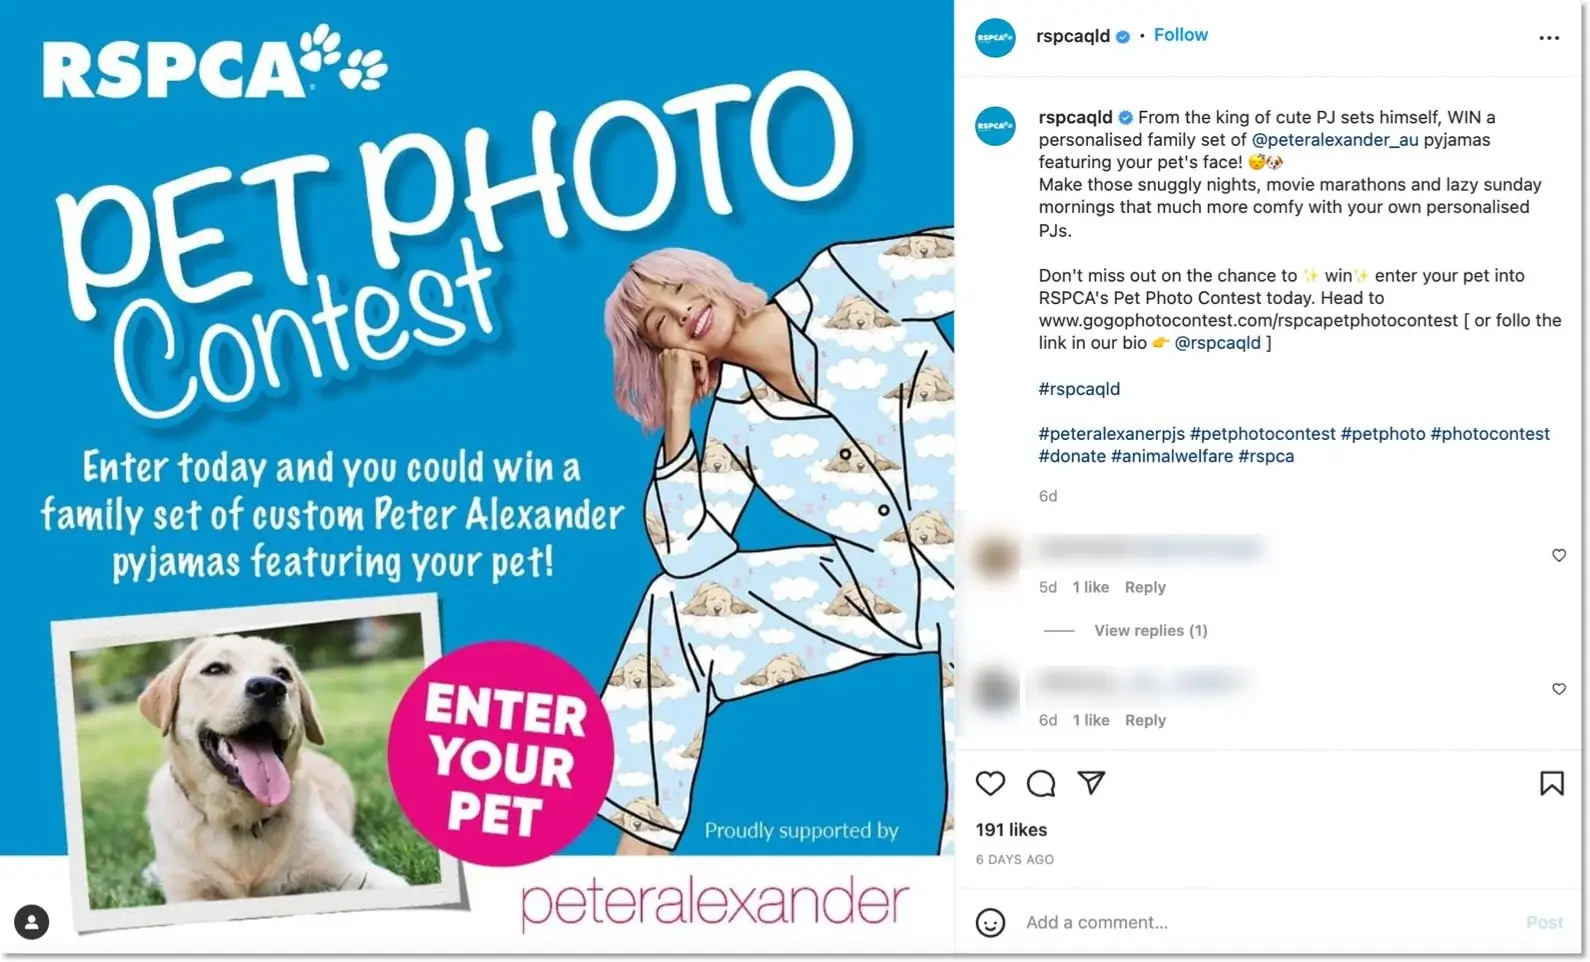 photo contest organized on Instagram by RSPCA